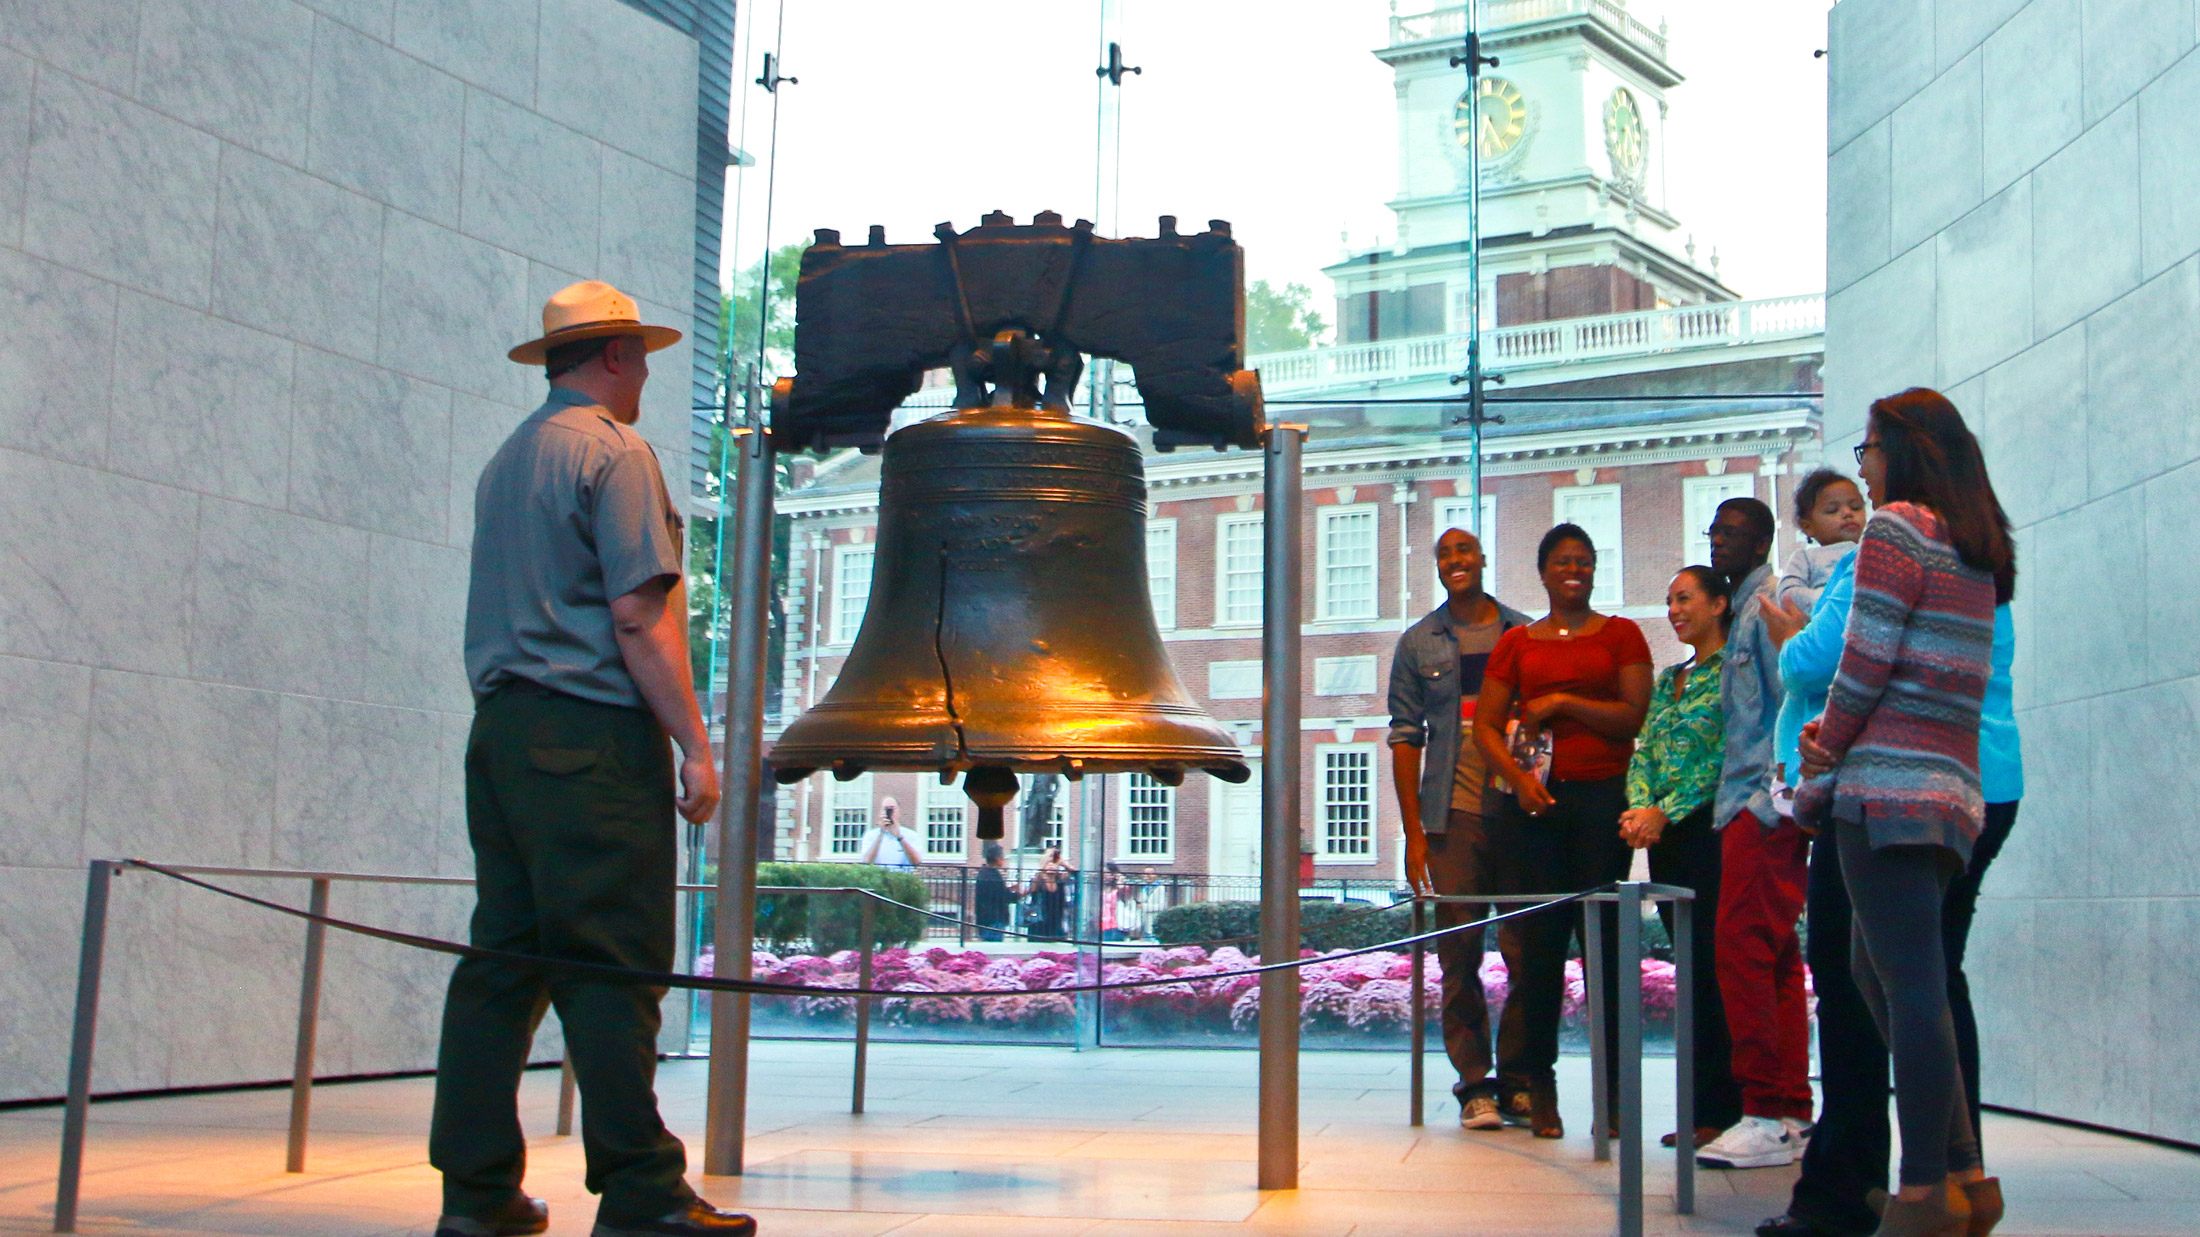 Tour De Lit Liberty Magnifique the 10 Most Essential Things to Do On Your First Visit to Philly